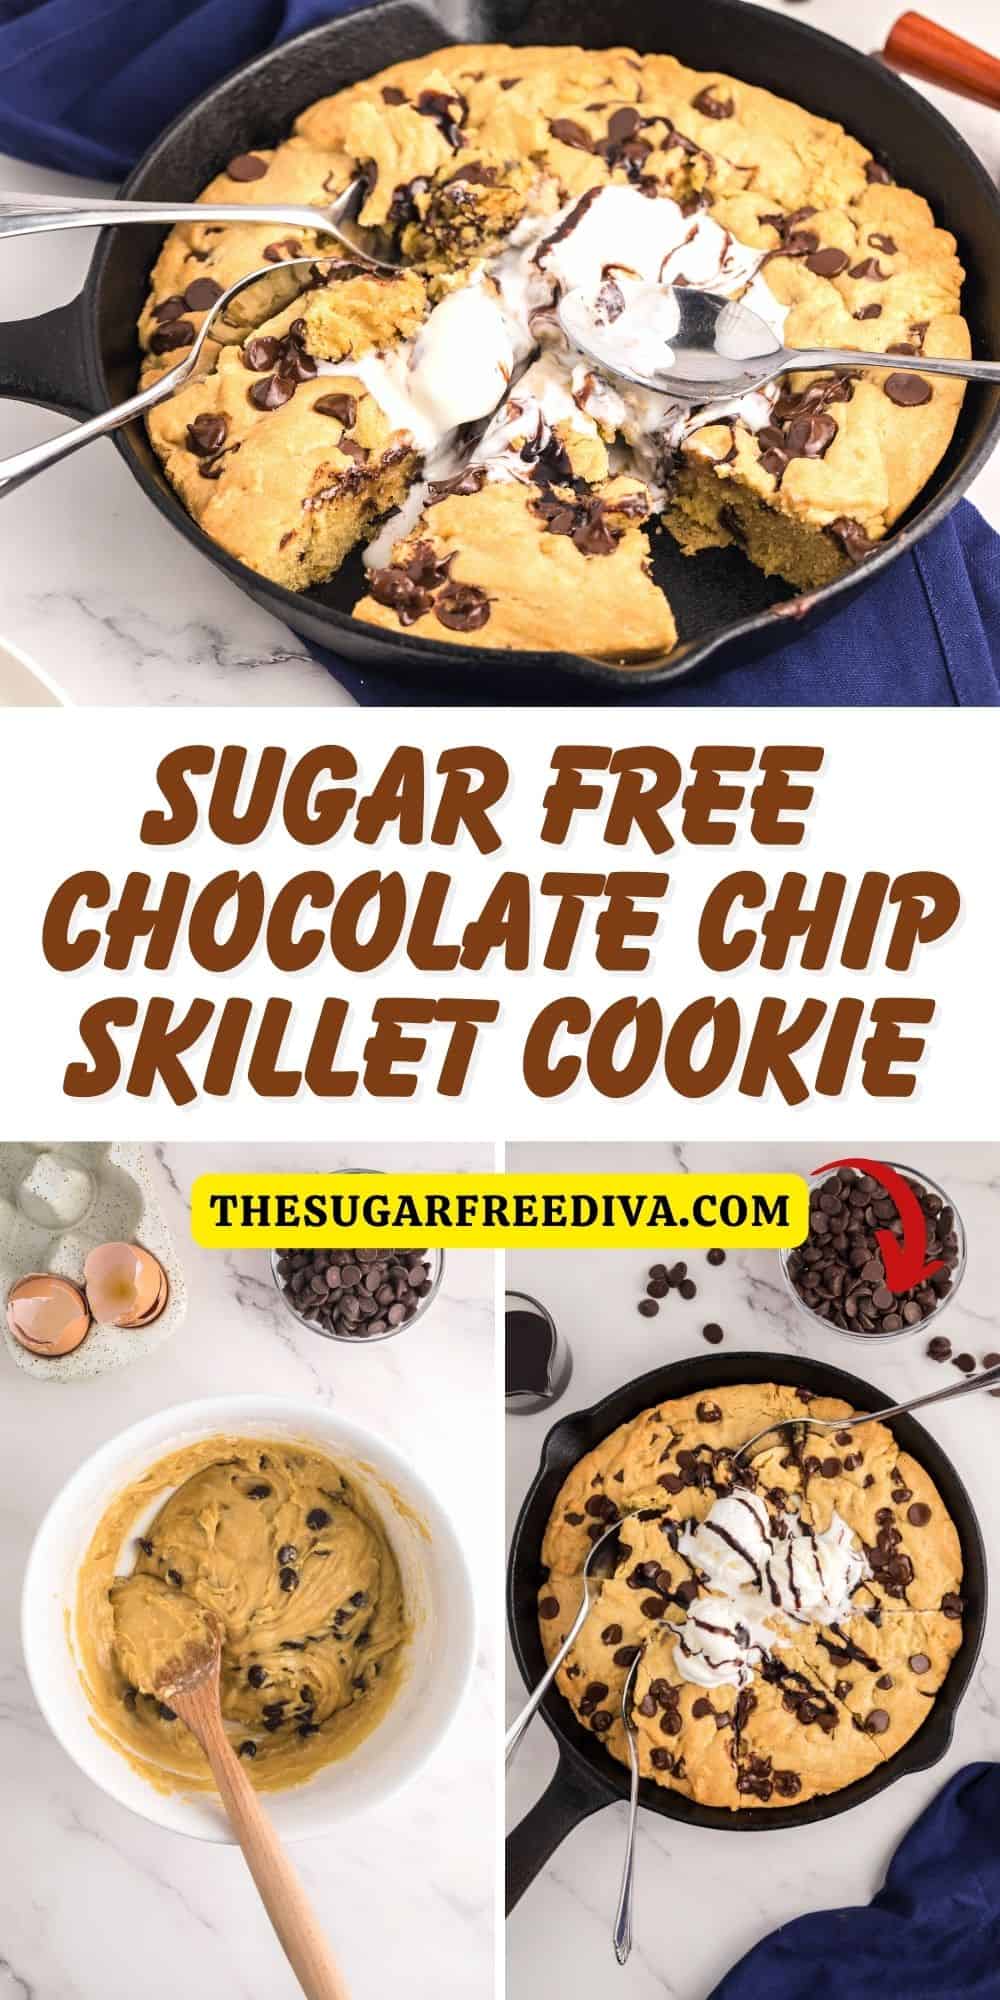 Sugar Free Chocolate Chip Skillet Cookie, a decadent and delicious dessert recipe baked in a skillet. Keto LC Option.